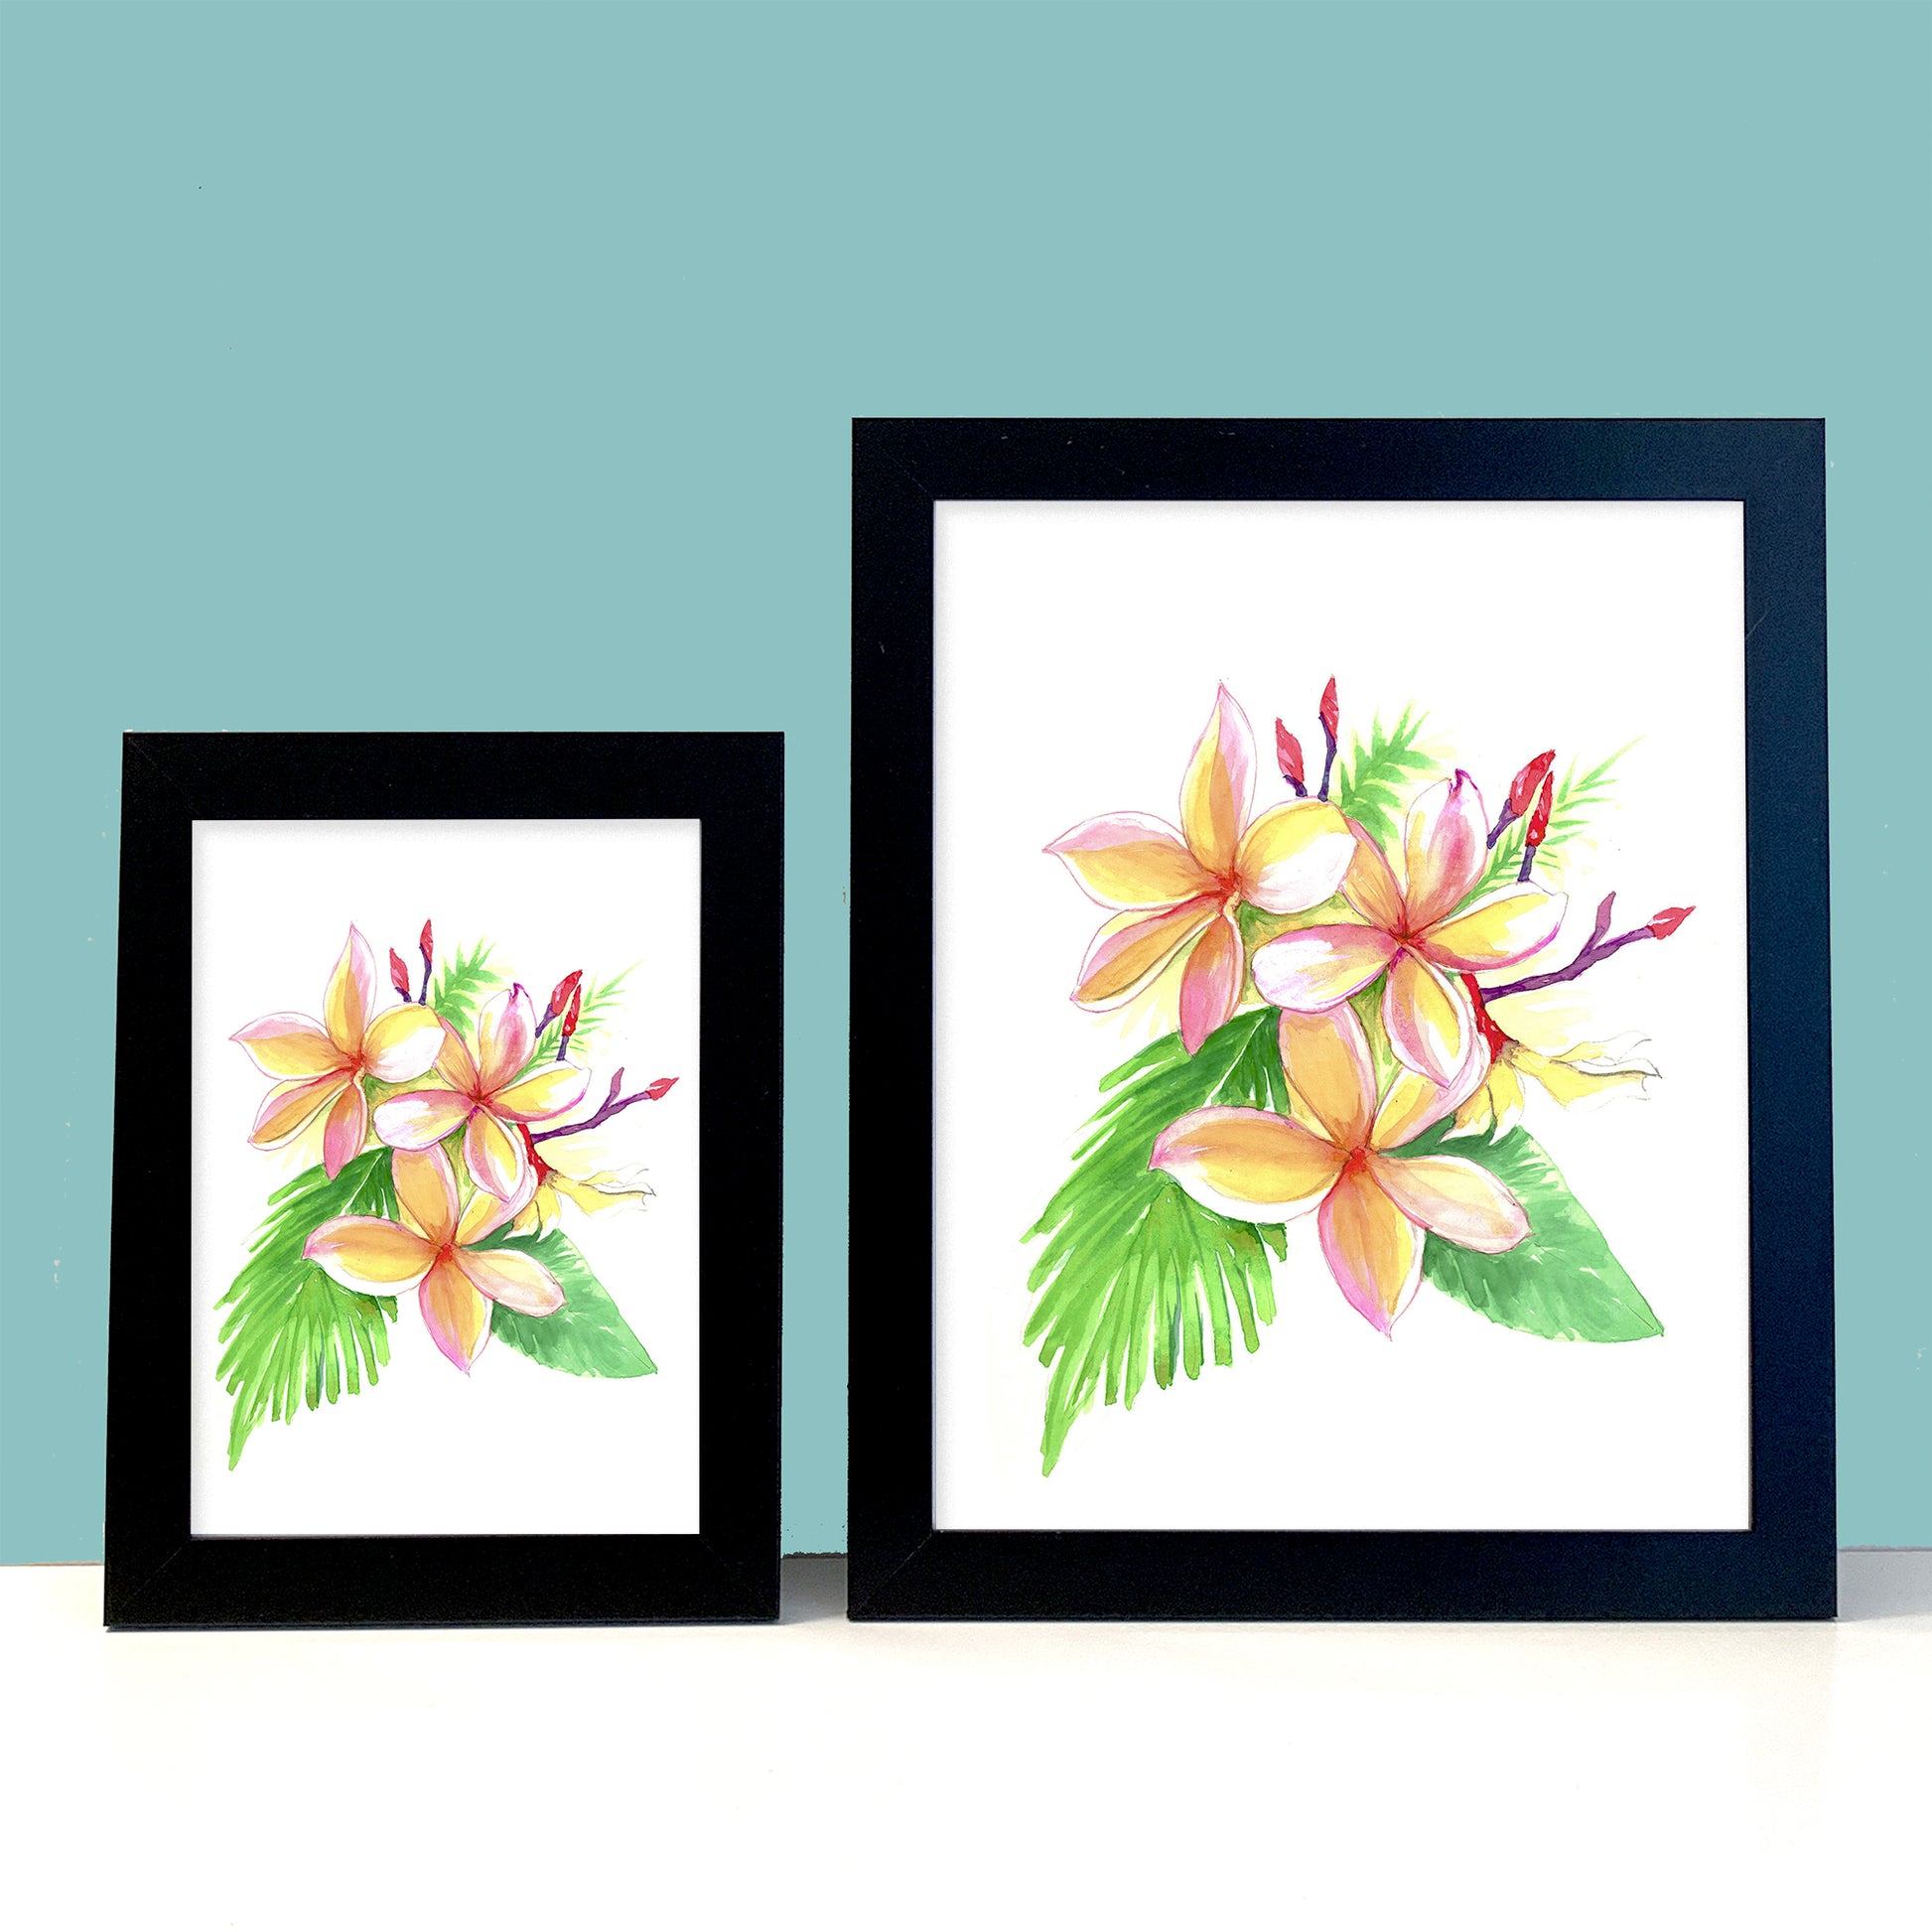 Plumeria Tropical Flower Painting Wall Art for your home - Flamingo Shores - Original Art for Home Decor and Gifts